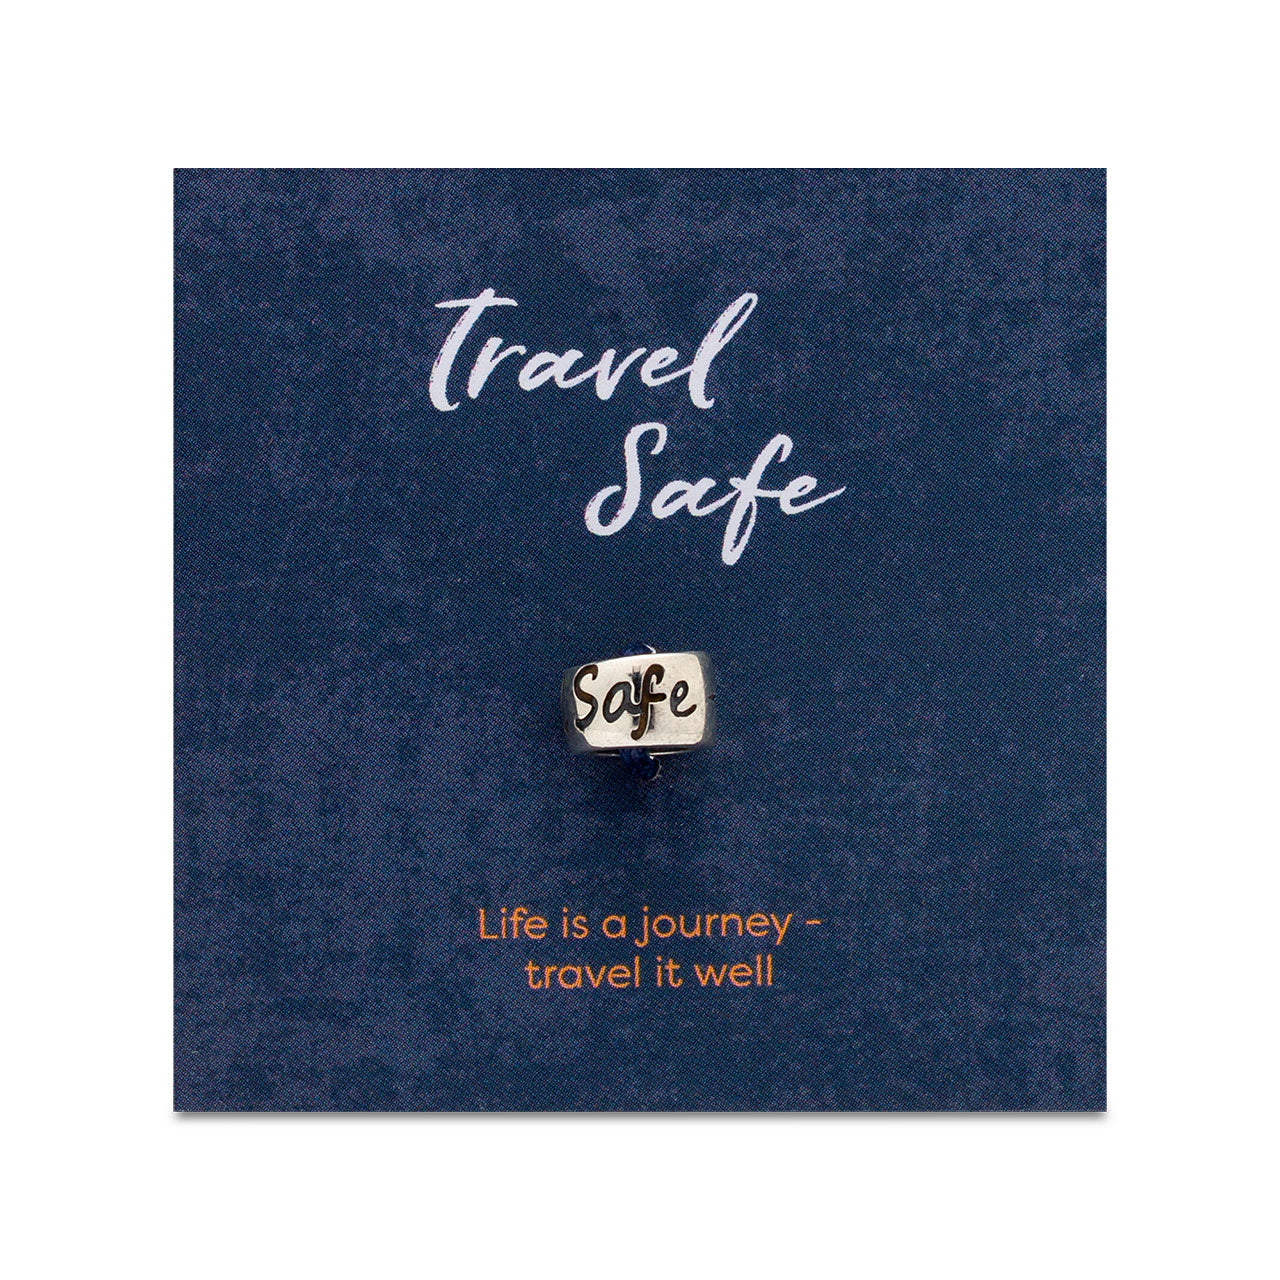 Travel Safe engraved silver bead for necklaces or bead charm bracelets - good luck on your travels gift from Off The Map Jwellery Brighton